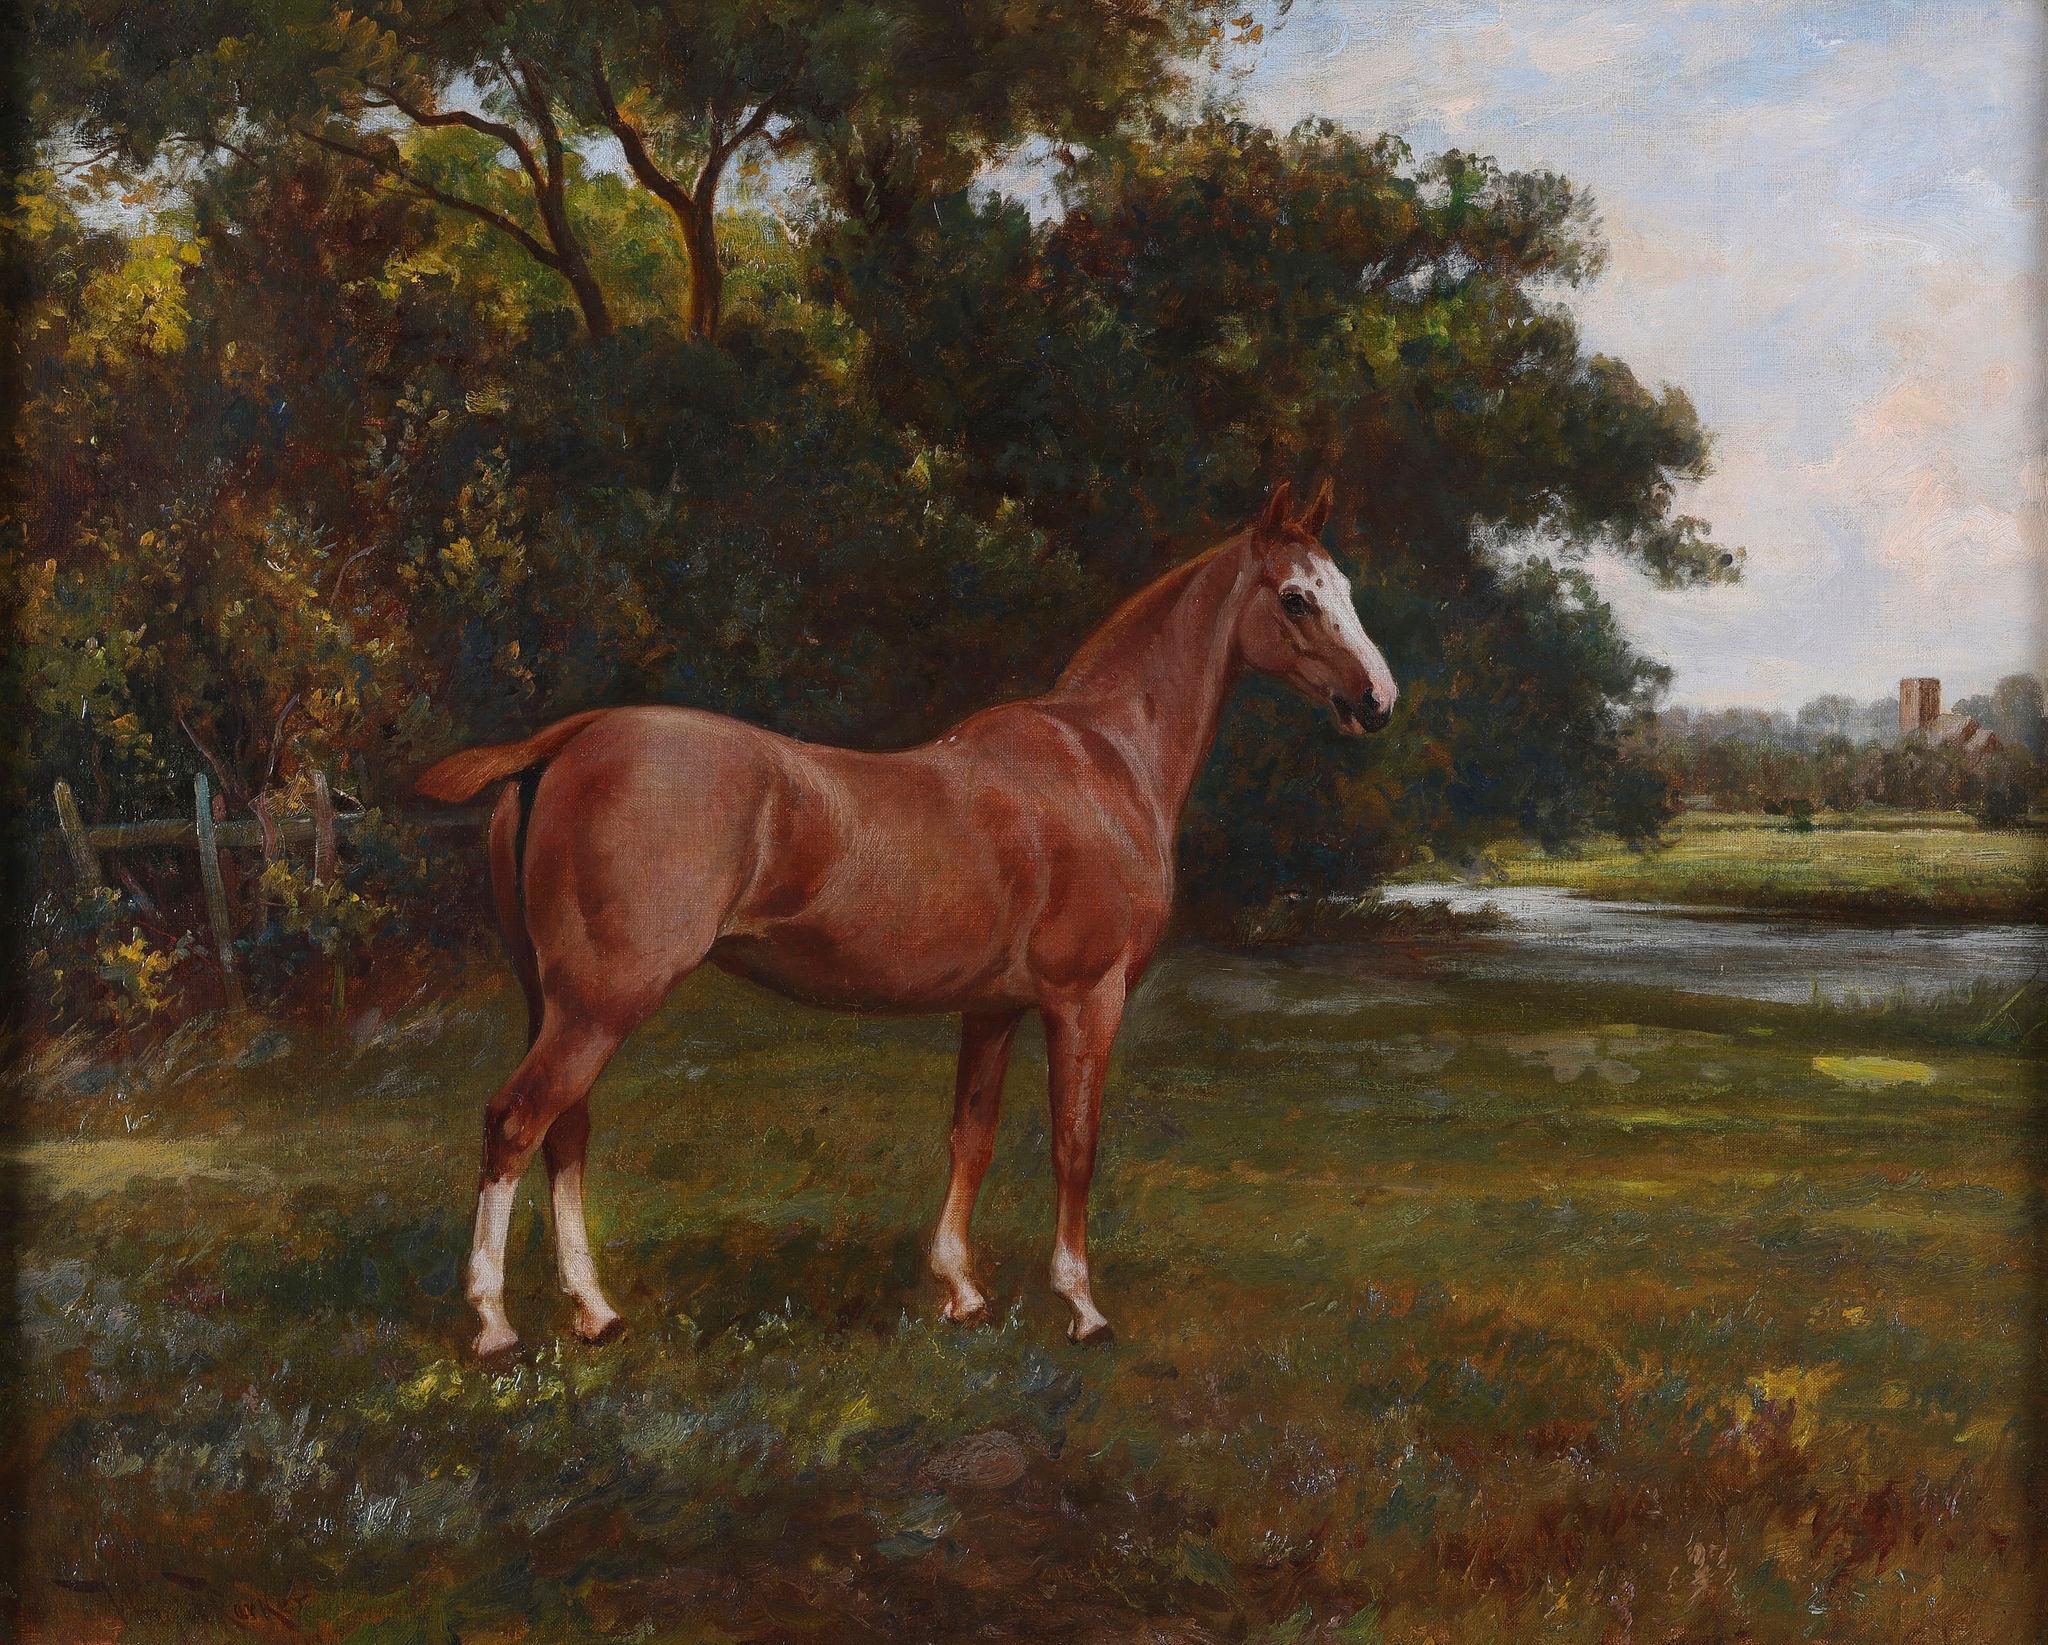 A Horse in a Field. Oil on Canvas - Painting by Wright Barker